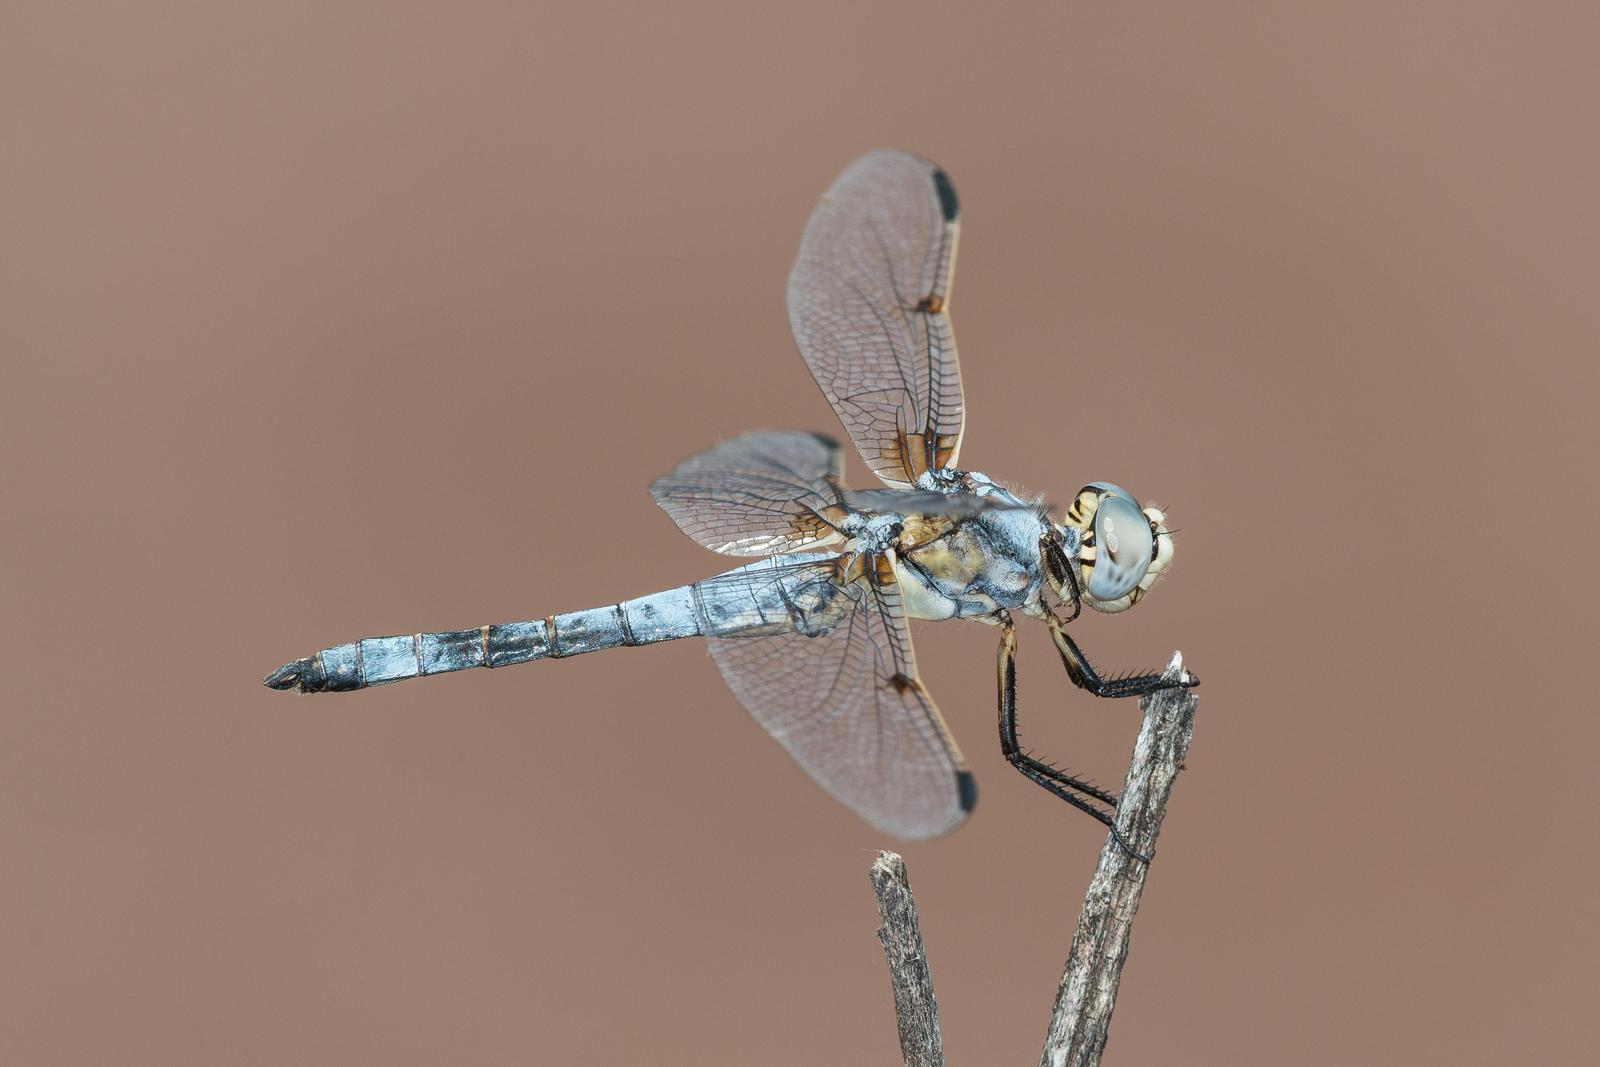 Bleached Skimmer Photo by David Oakley